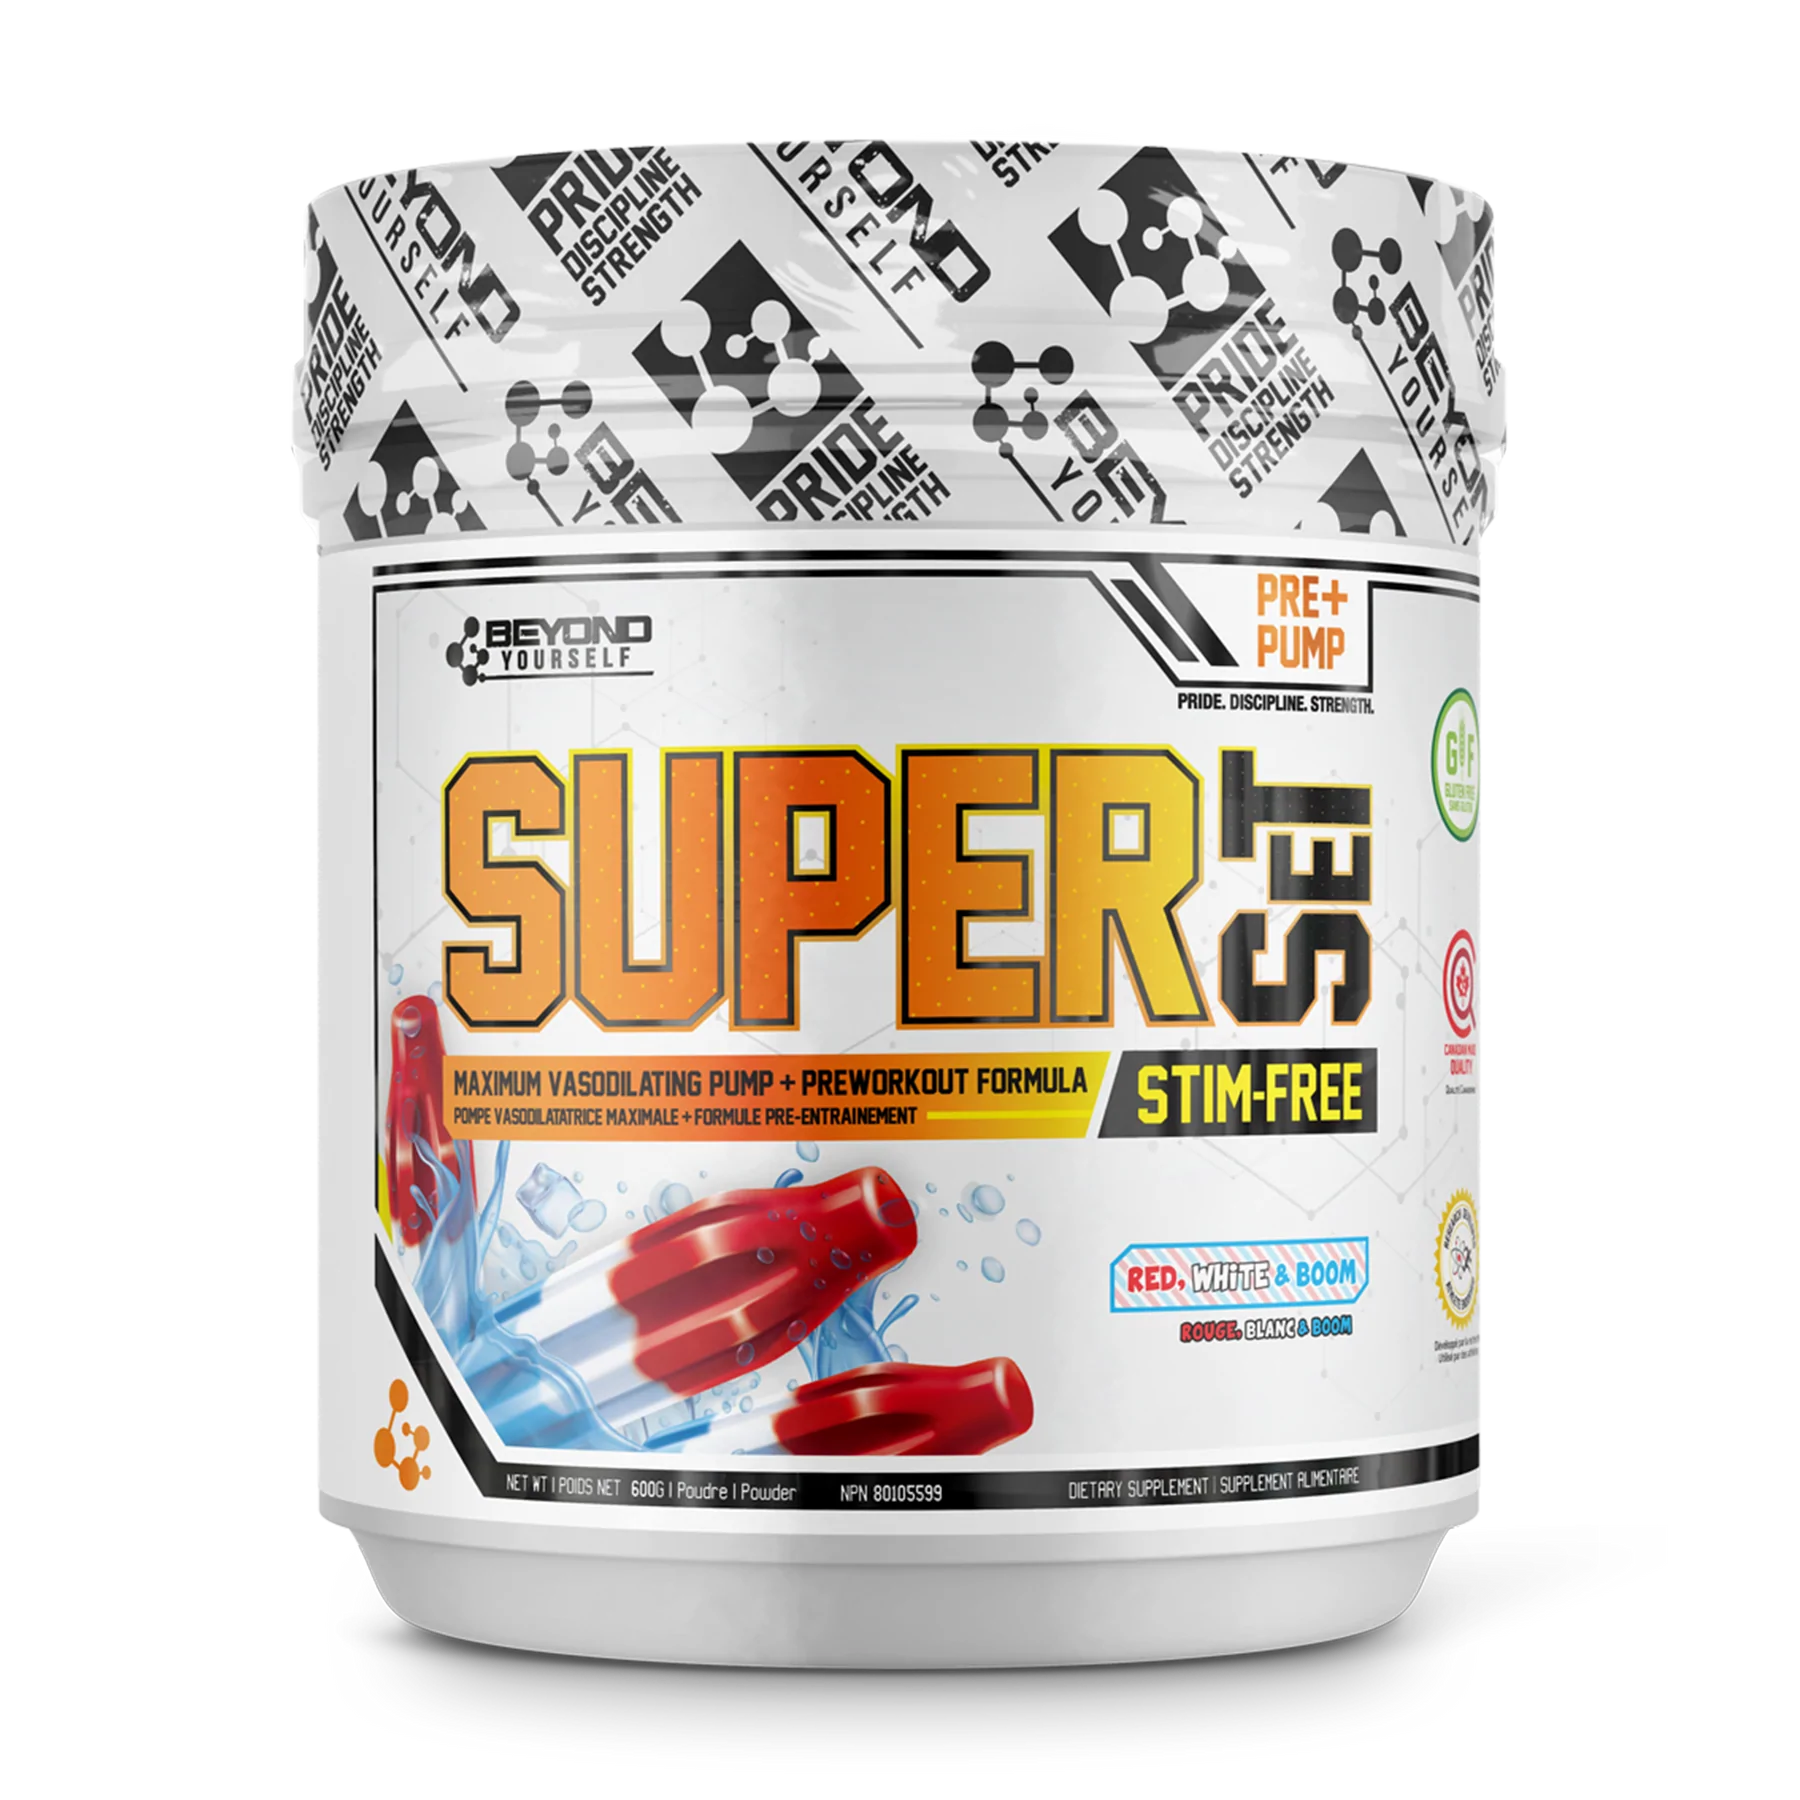 Beyond Yourself Superset Pre-Workout Stim Free (No Caffeine) 40 Servings